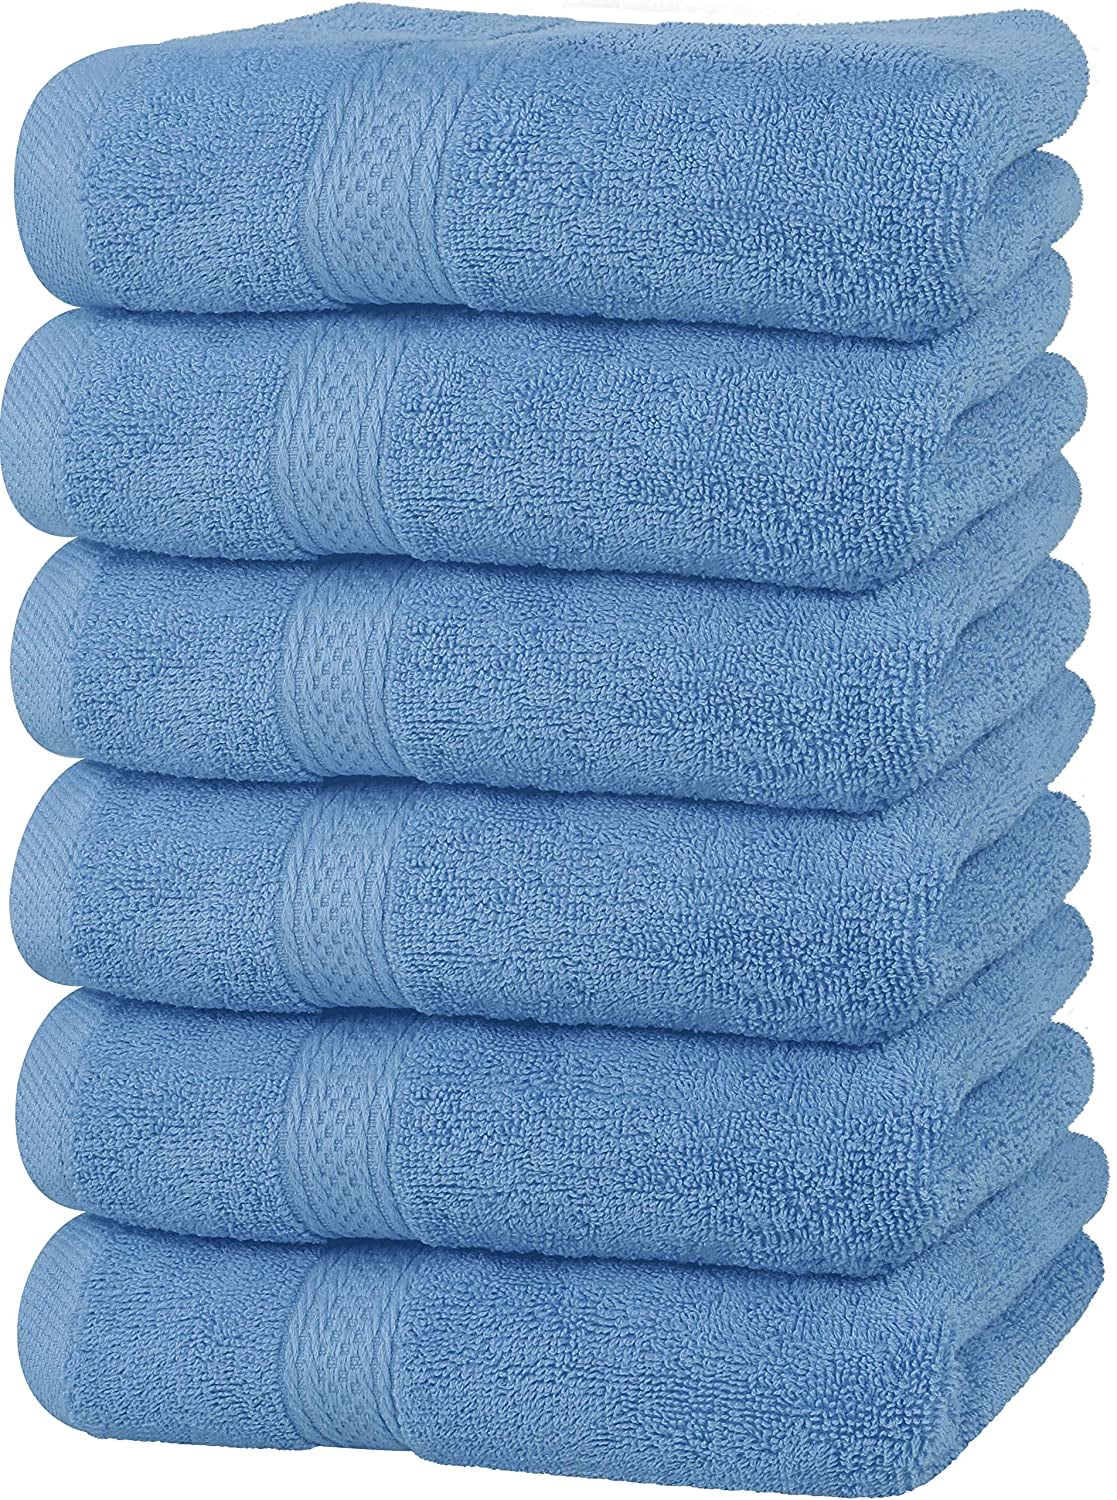 Utopia Towels Premium Black Hand Towels,  Prime Day Is NOT Over Yet!  Shop the 50+ Best Deals We Found For Day 2